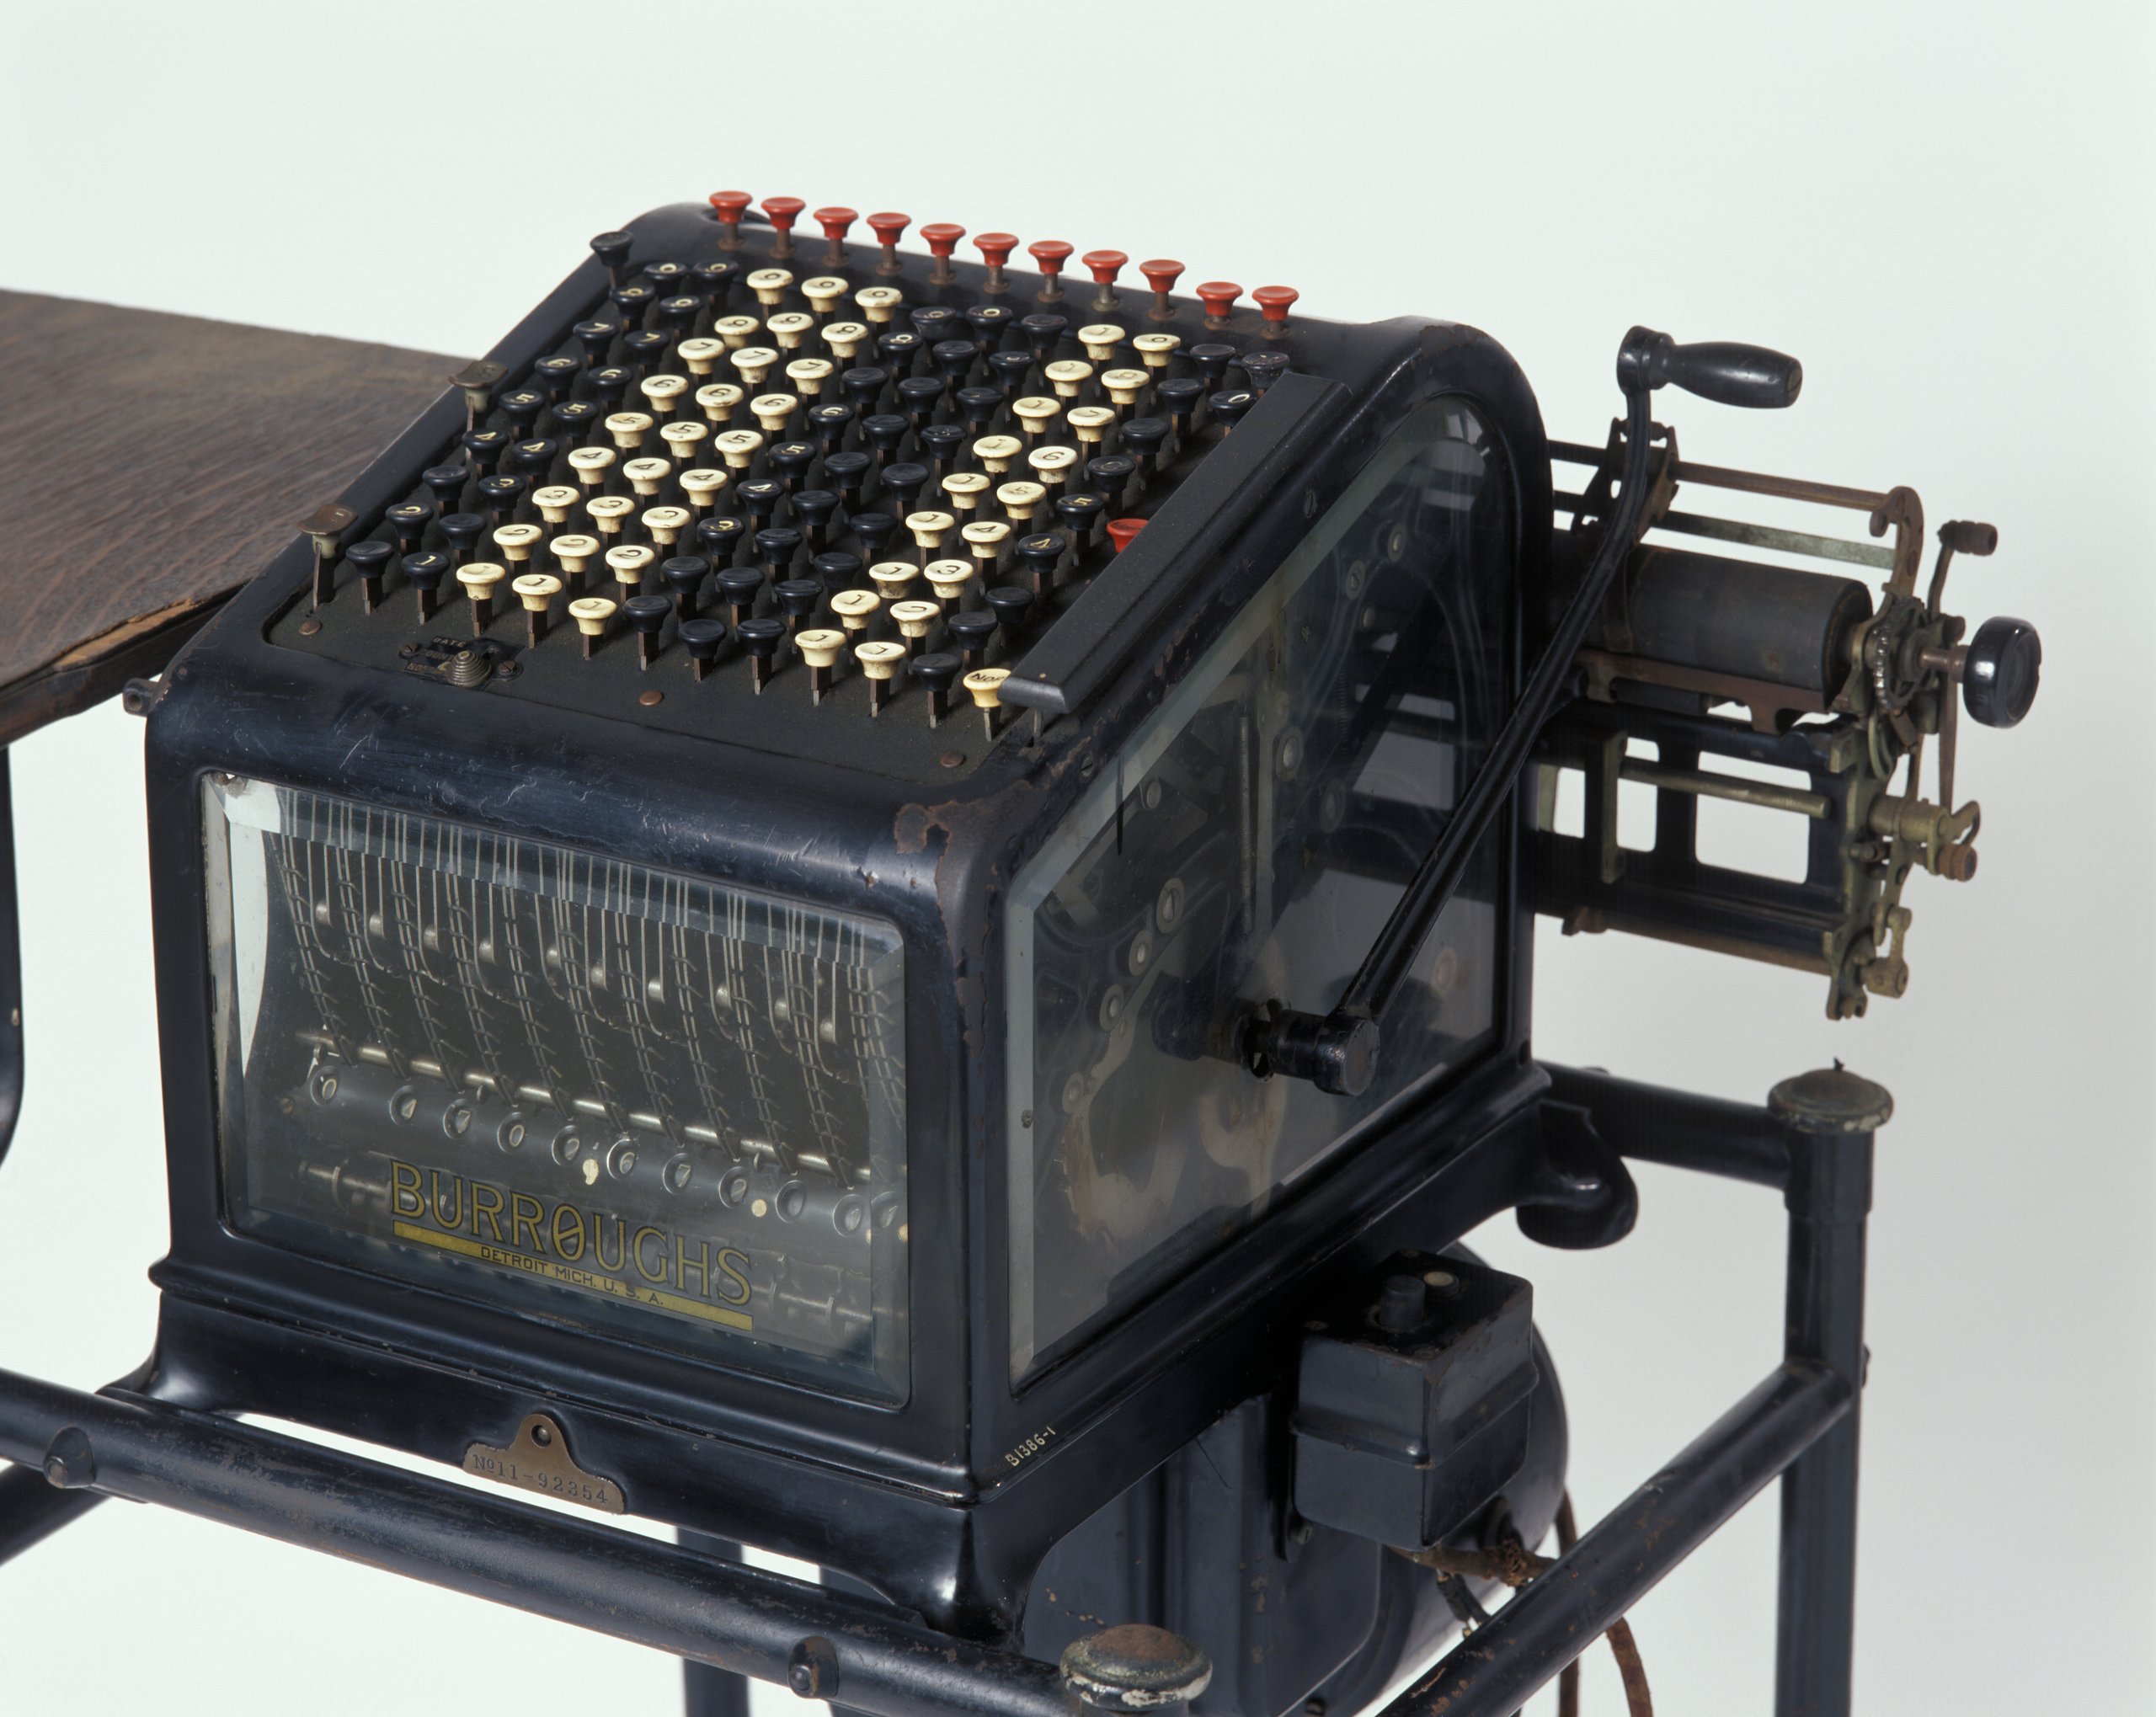 Burroughs console model listing and adding machine